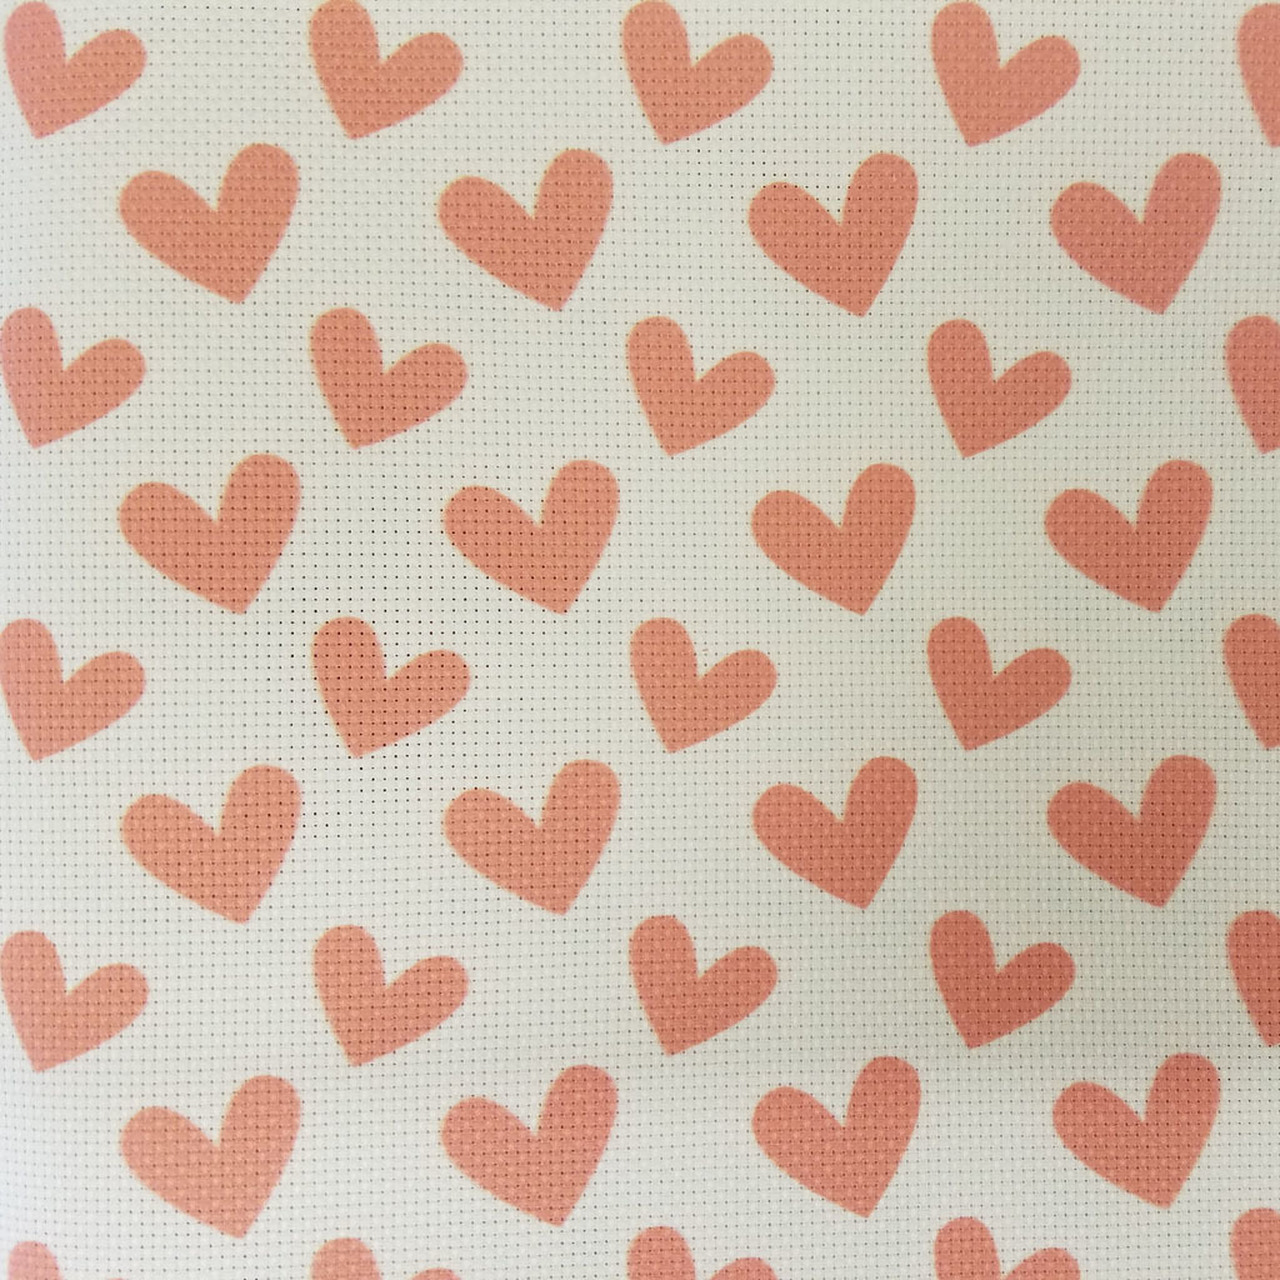 Red Hearts Patterned Cross Stitch Fabric